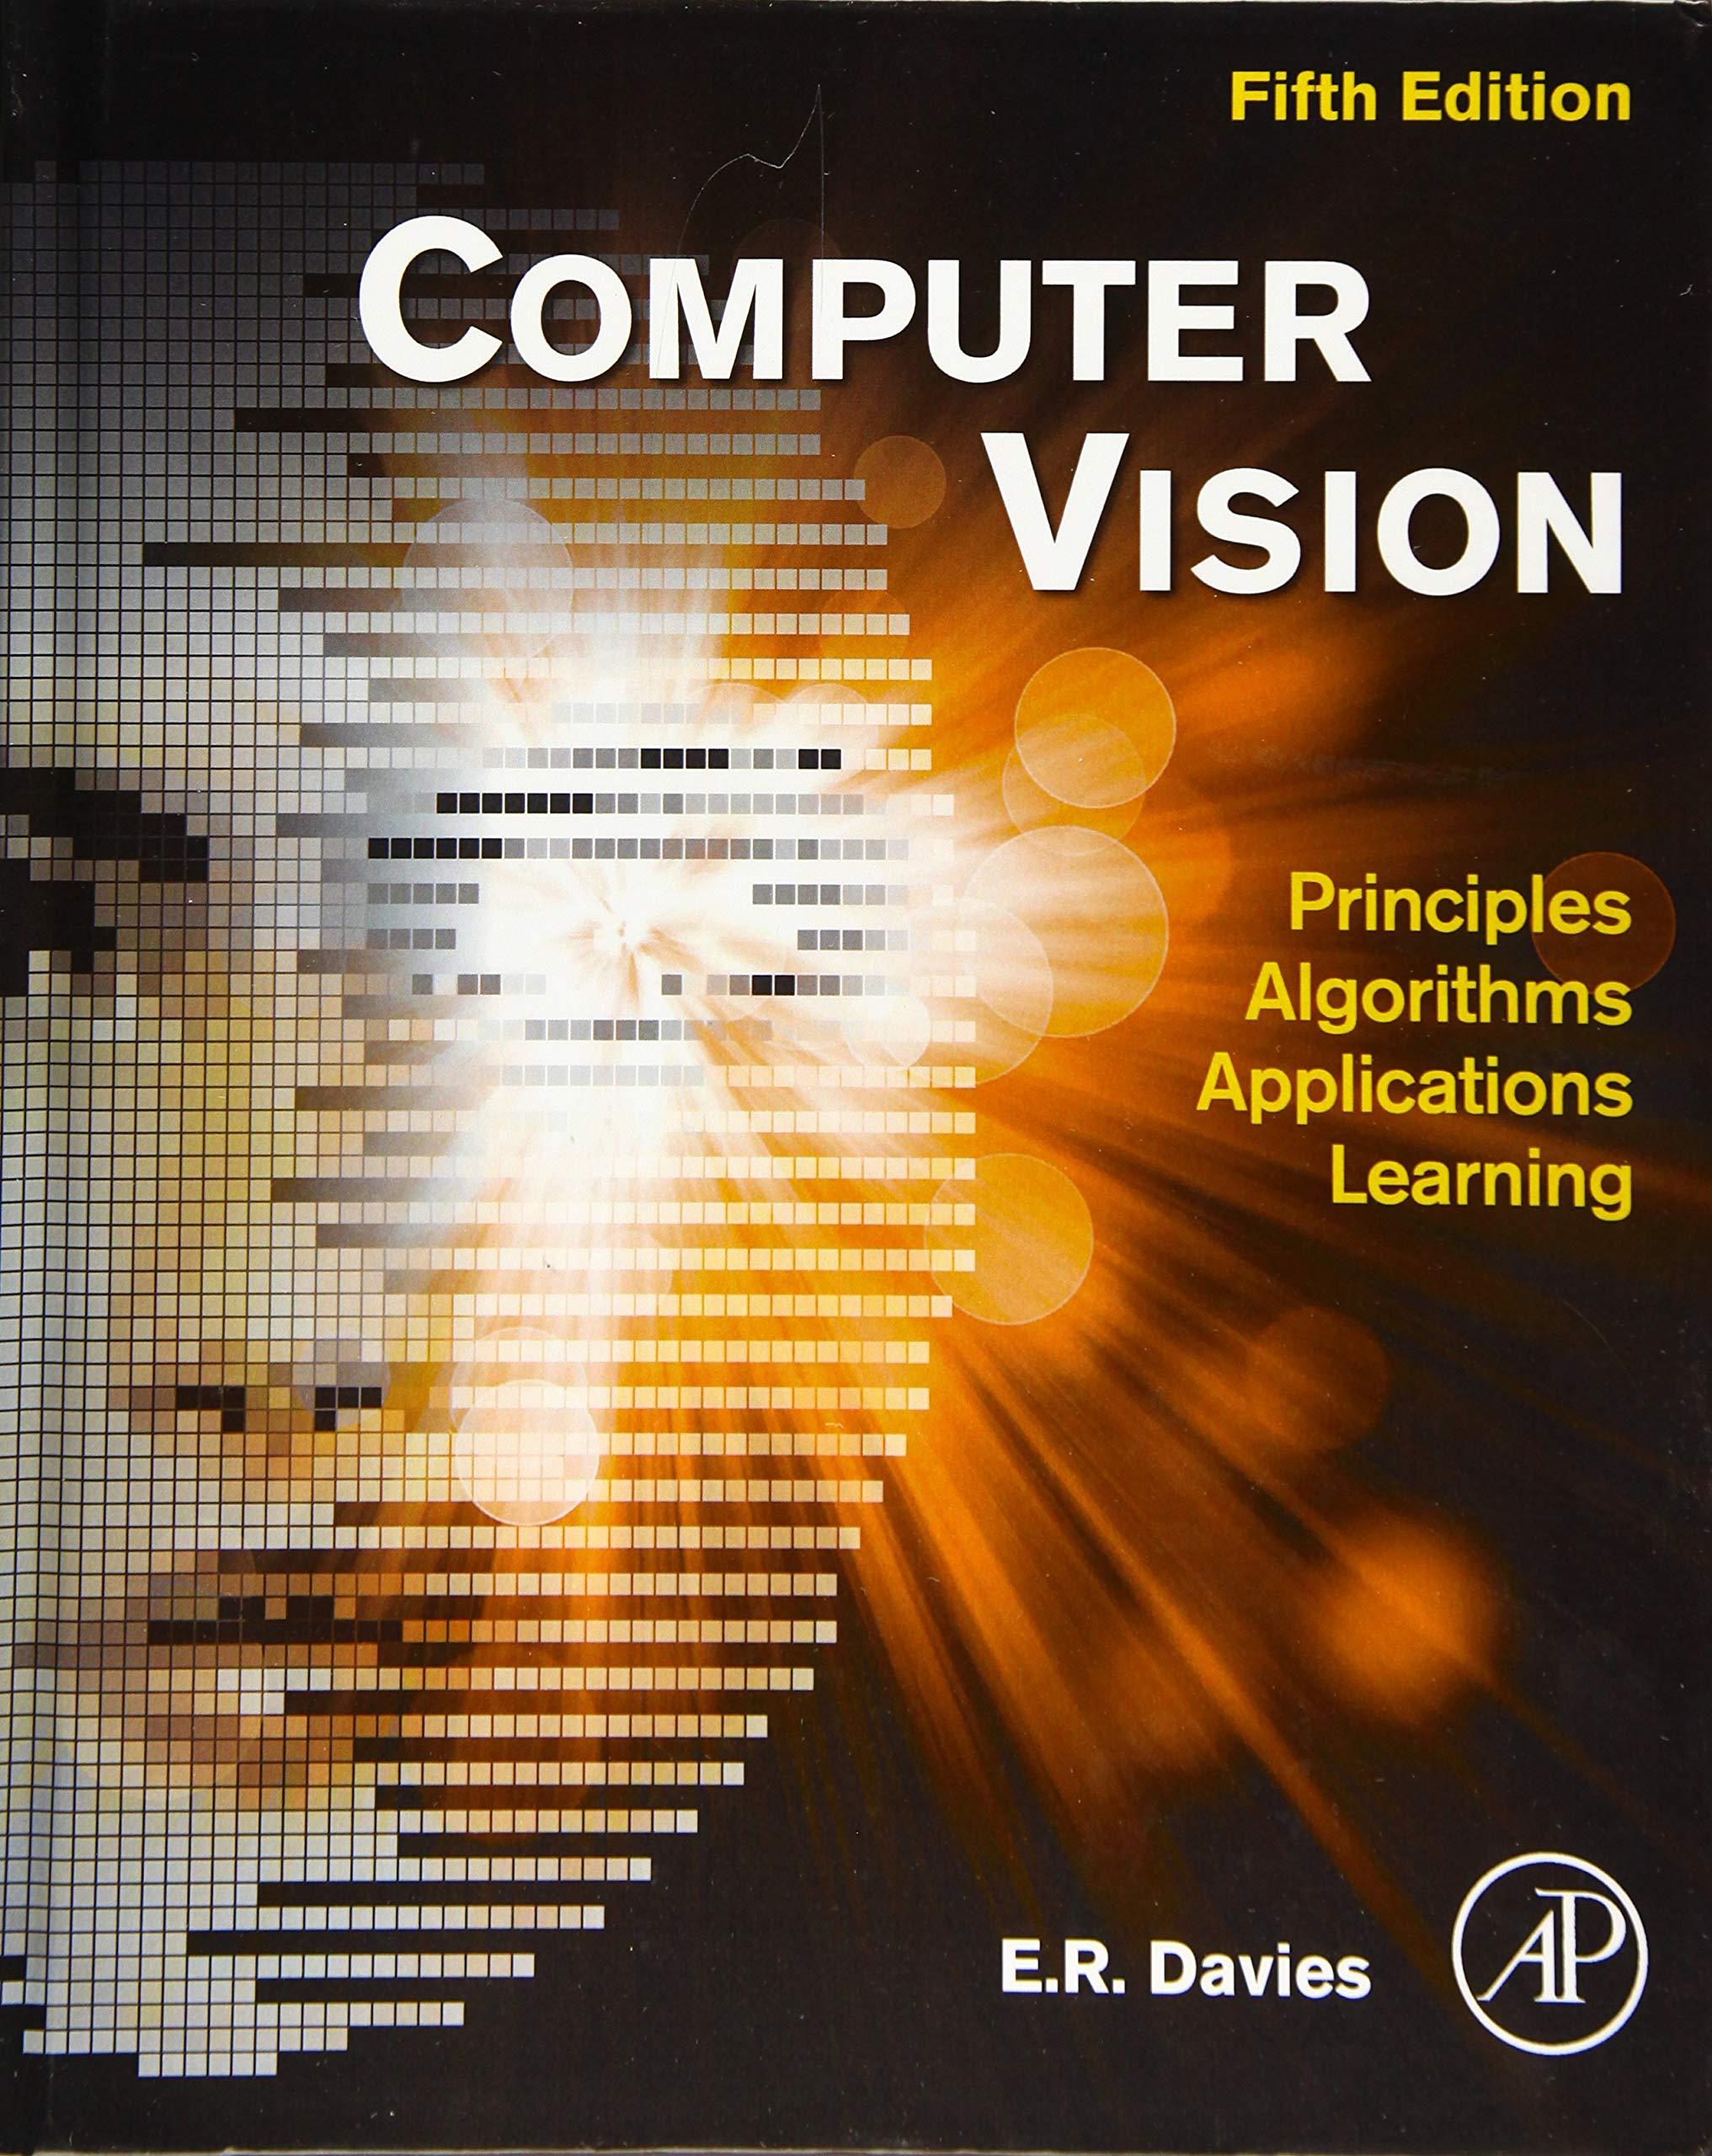 computer vision principles algorithms applications learning 5th edition e. r. davies 012809284x, 9780128092842